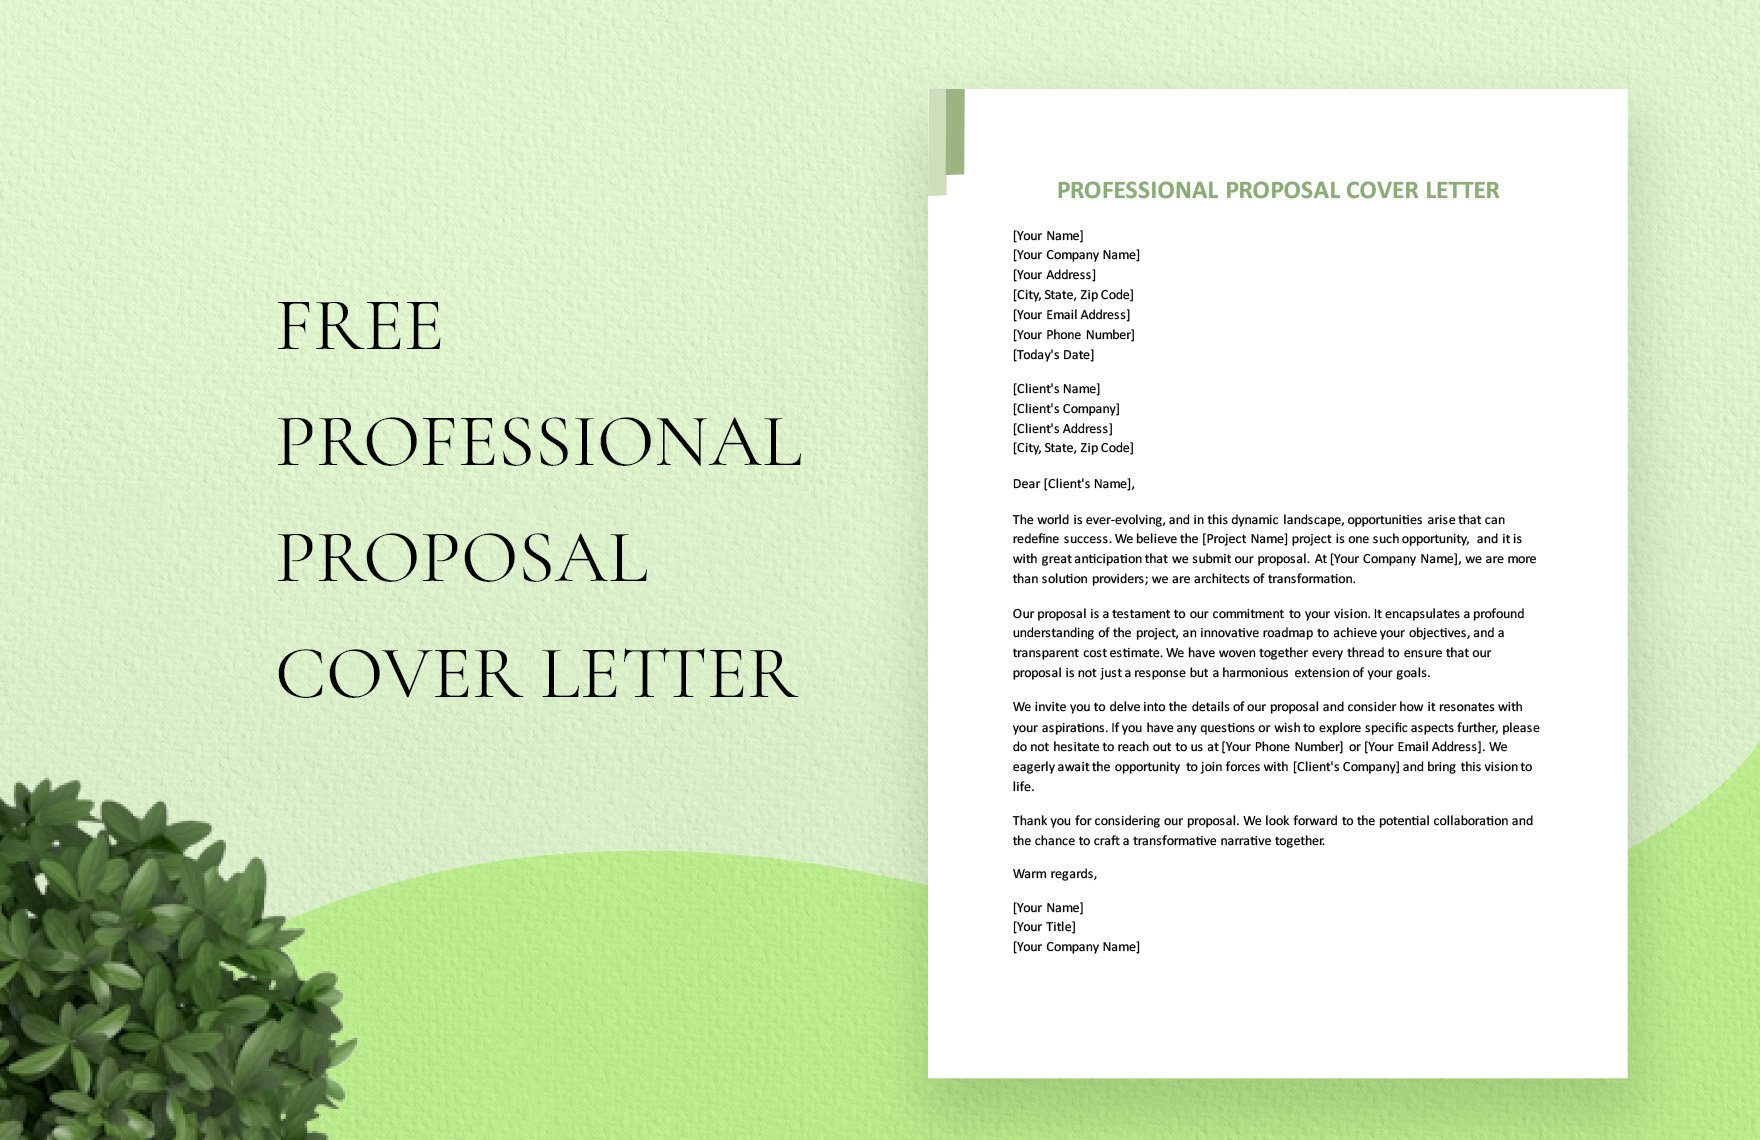 Professional Proposal Cover Letter